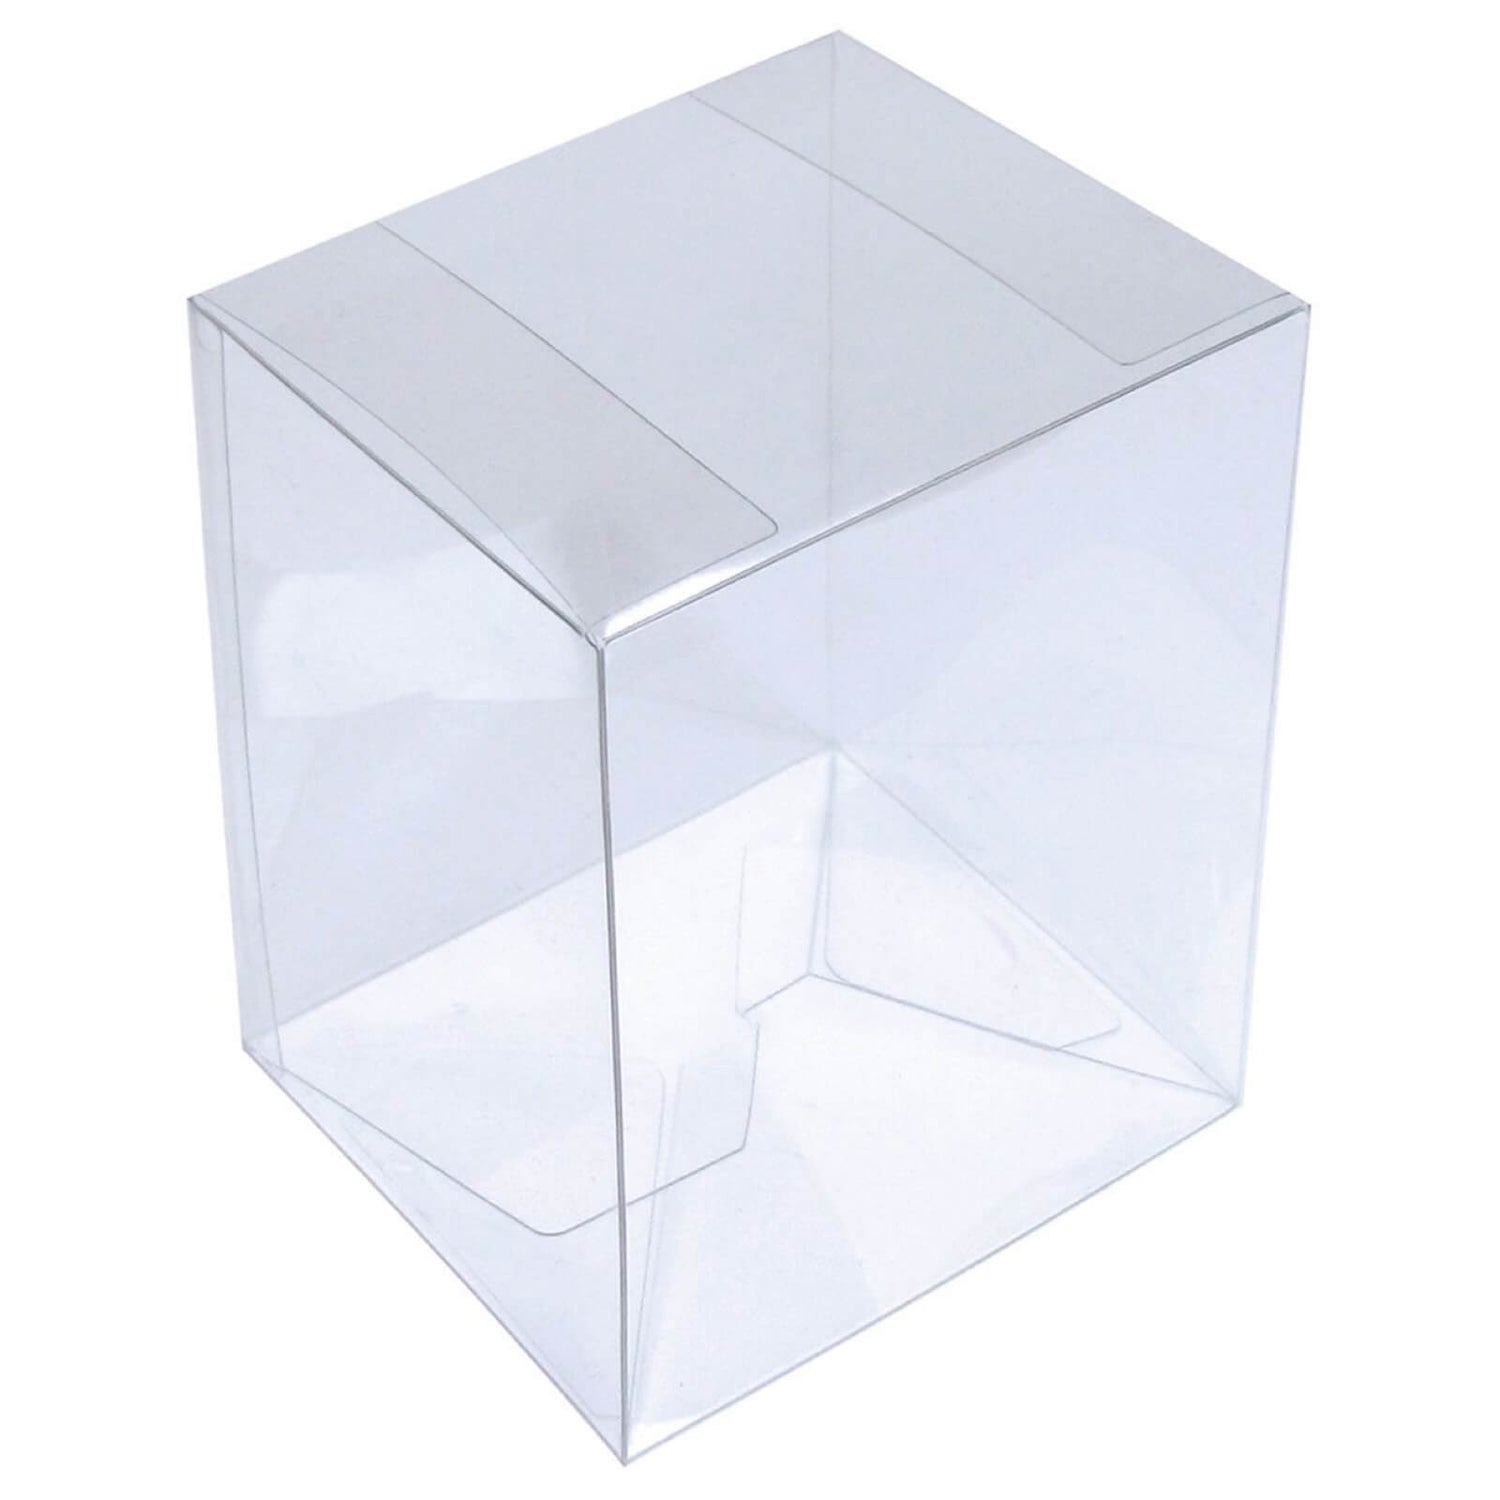 3 3/4" Vinyl Collectible Collapsible Protector Box 20-pack